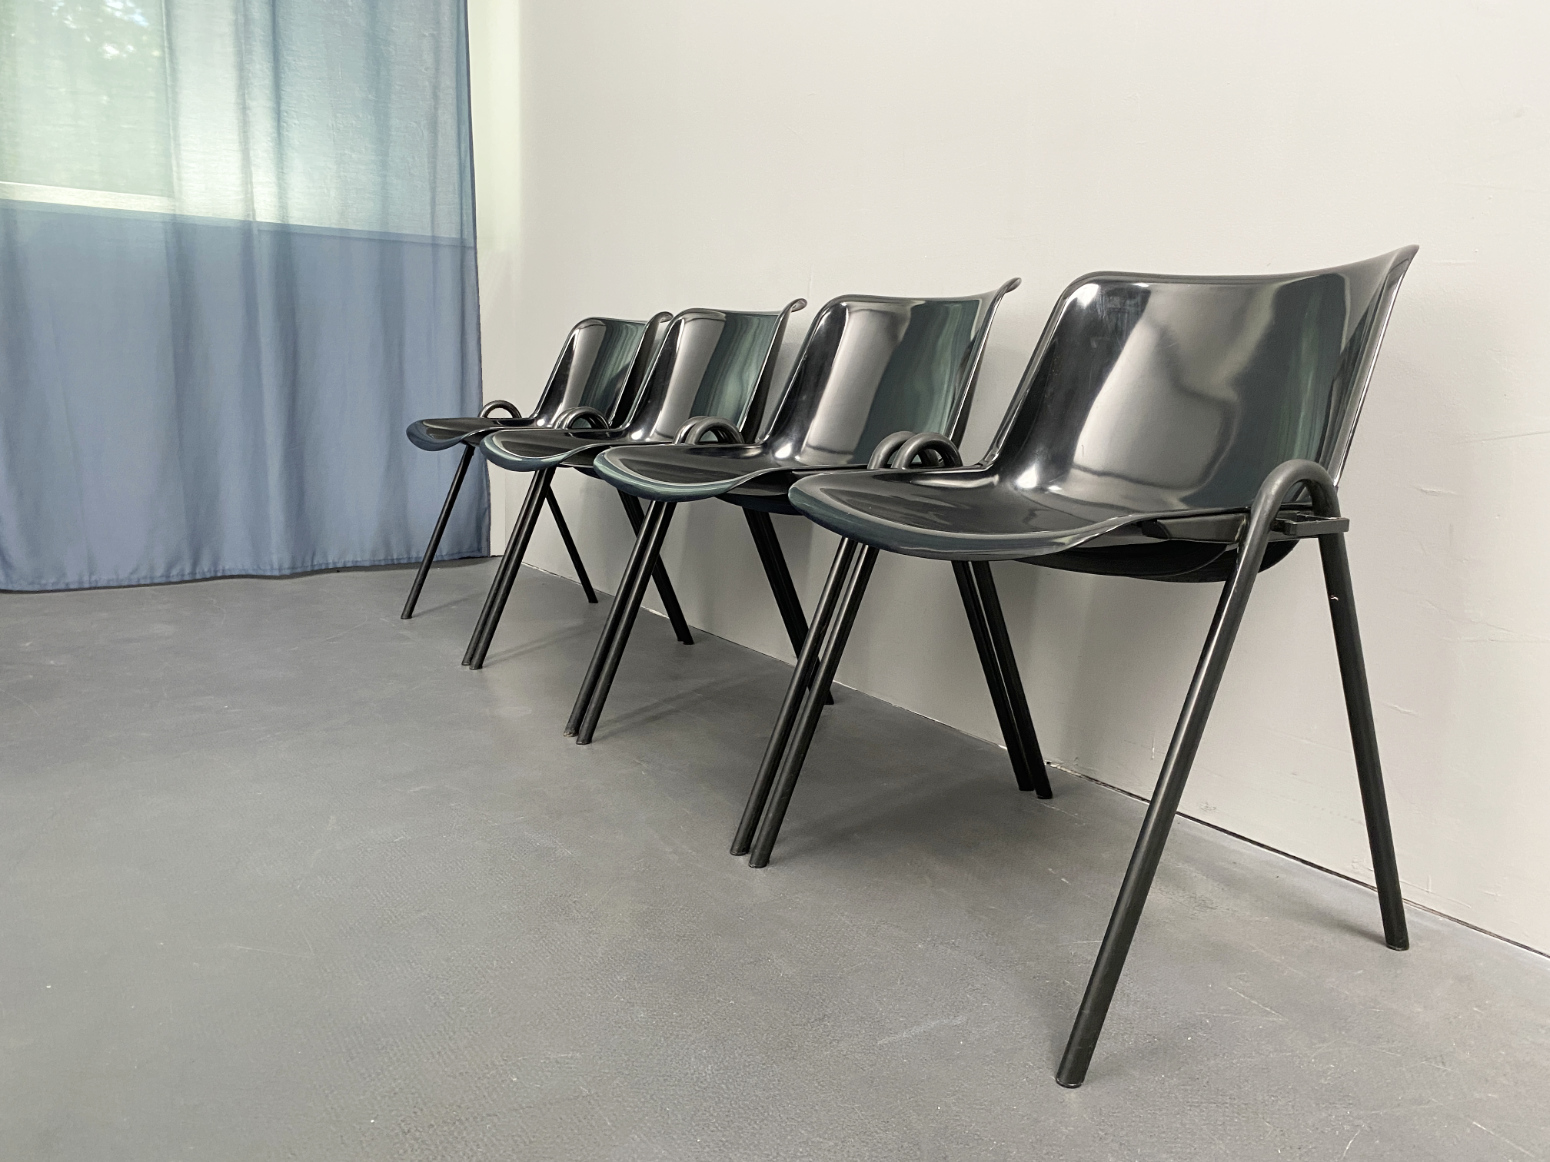 Set of 4 chairs Model Modus, by Osvaldo Borsani for Tecno, Italy, 1972. Stacking chair with additional possibility to connect the chairs in a row